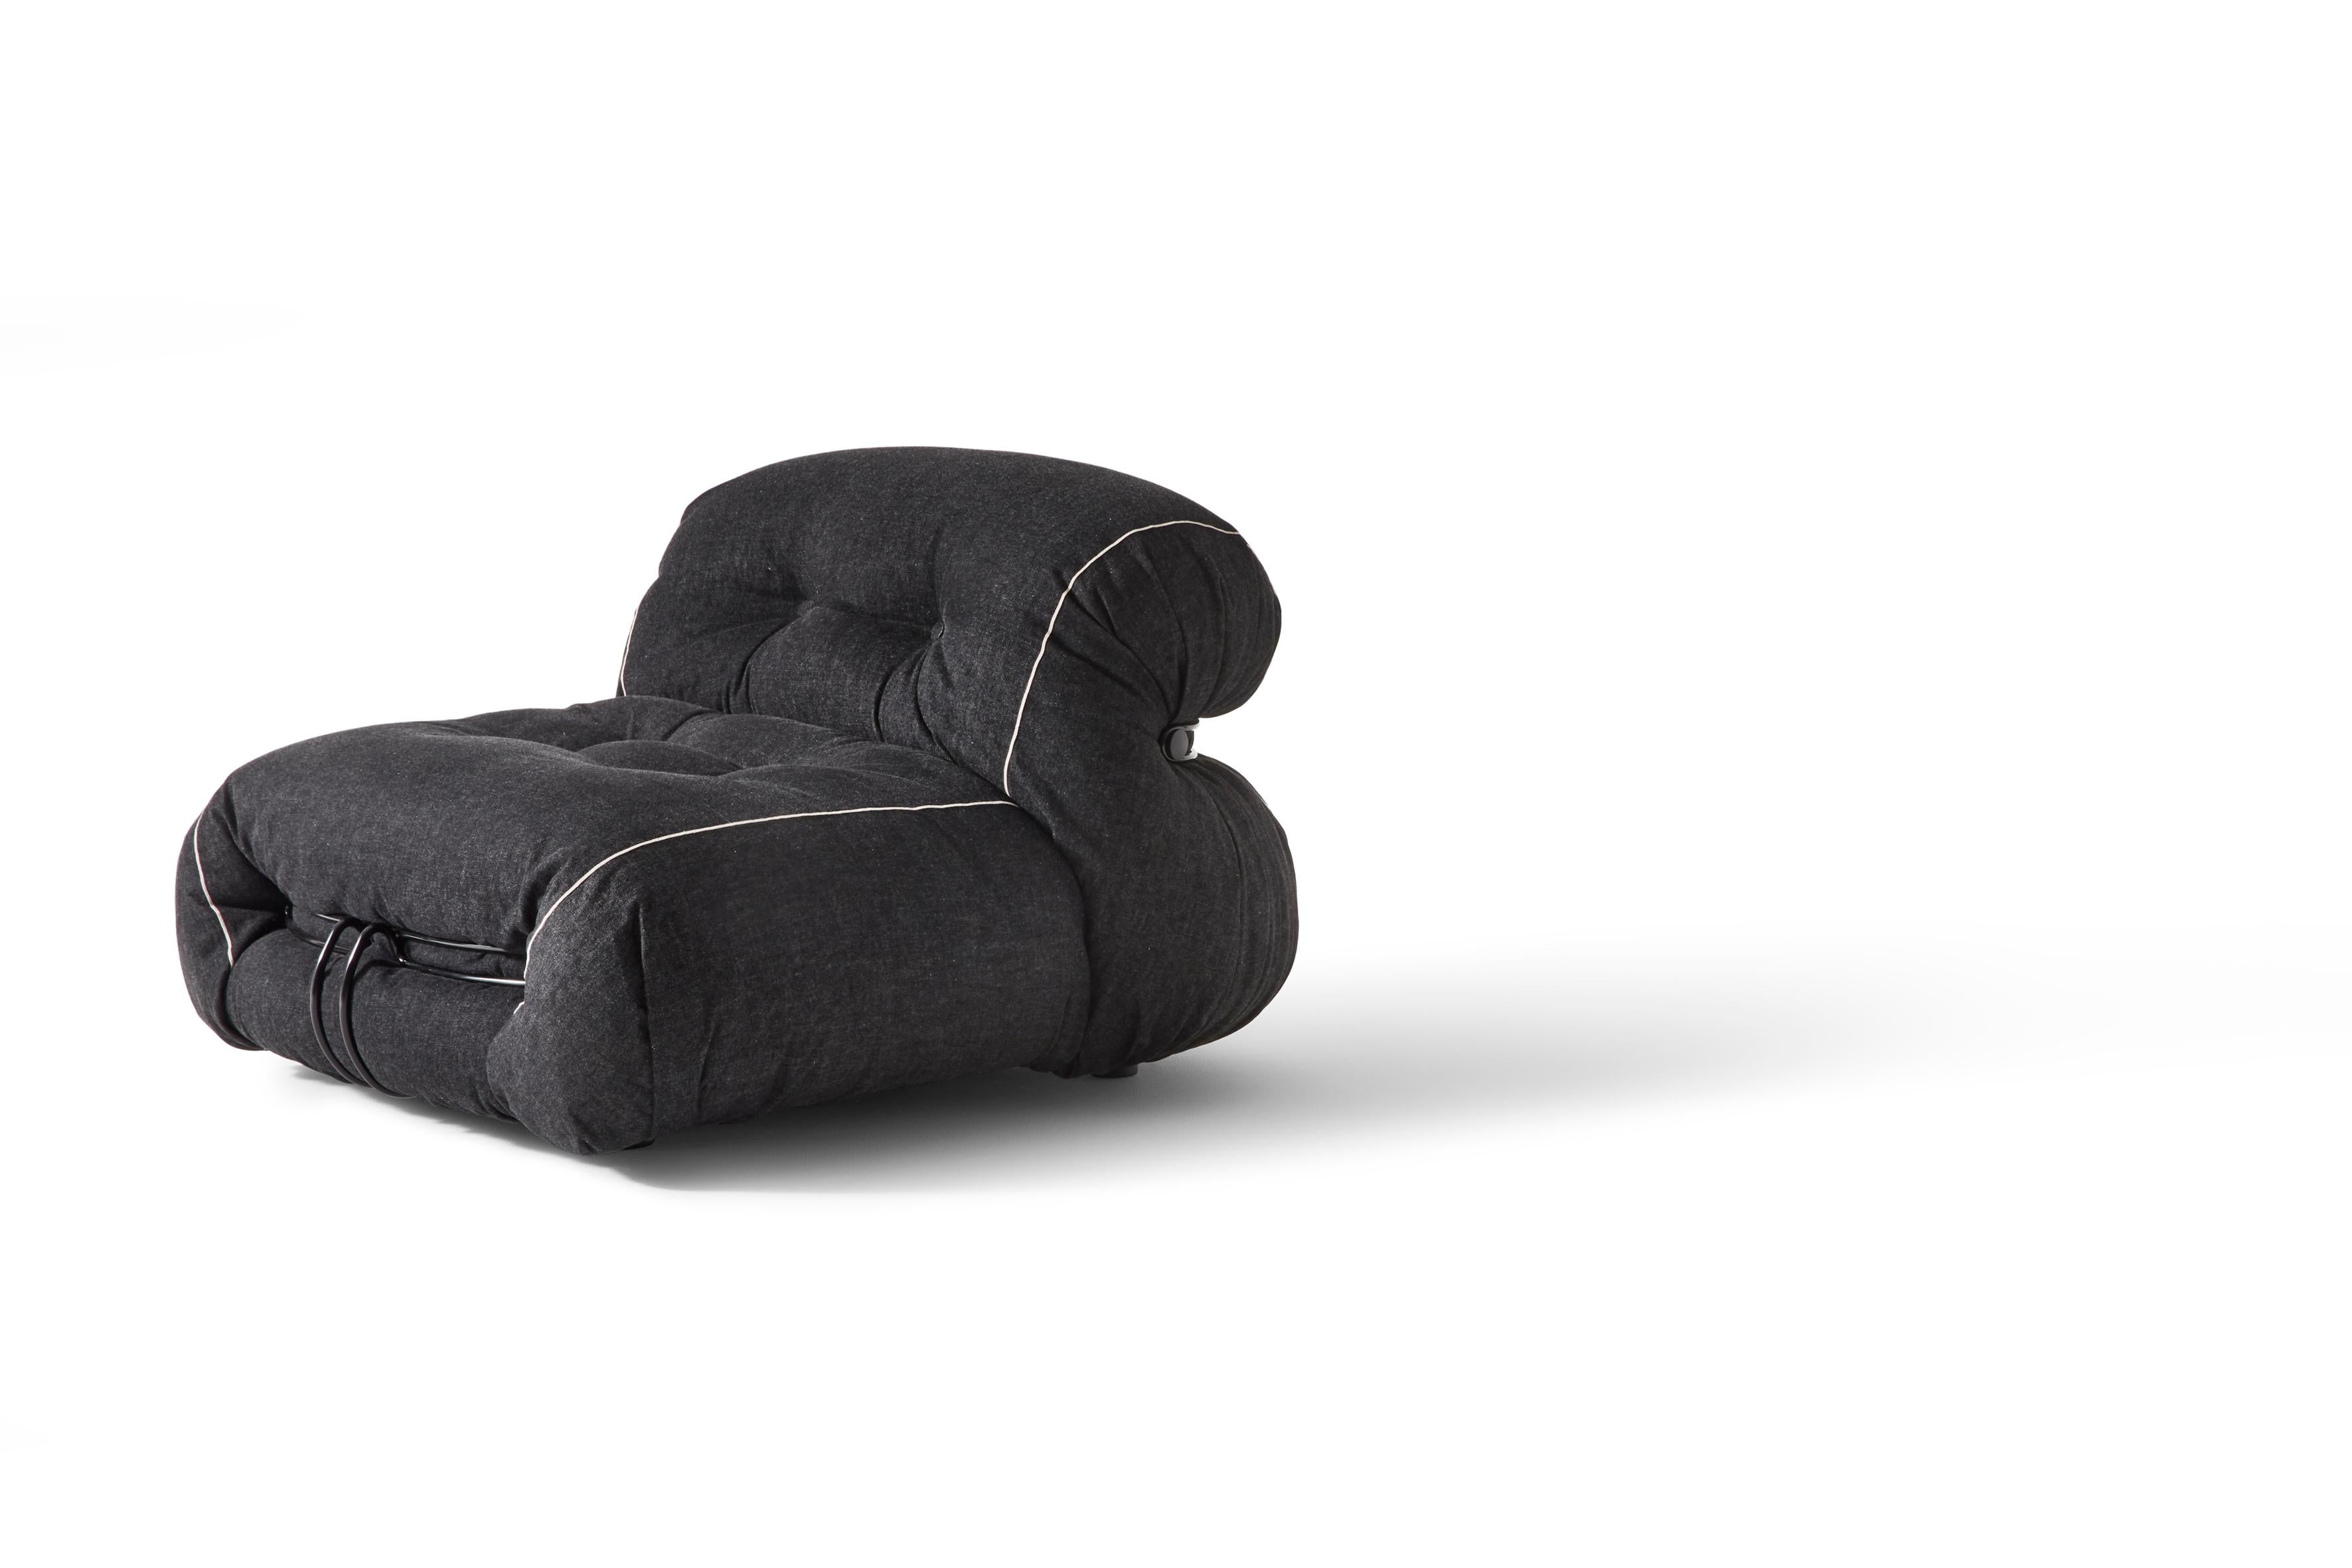 Soriana Limited Edition Denim Armchair by Afra & Tobia Scarpa for Cassina.

A design armchair with soft, generous contours, designed by Afra and Tobia Scarpa in the 1960s to bring home casual comfort, is swathed in premium Japanese denim, in a